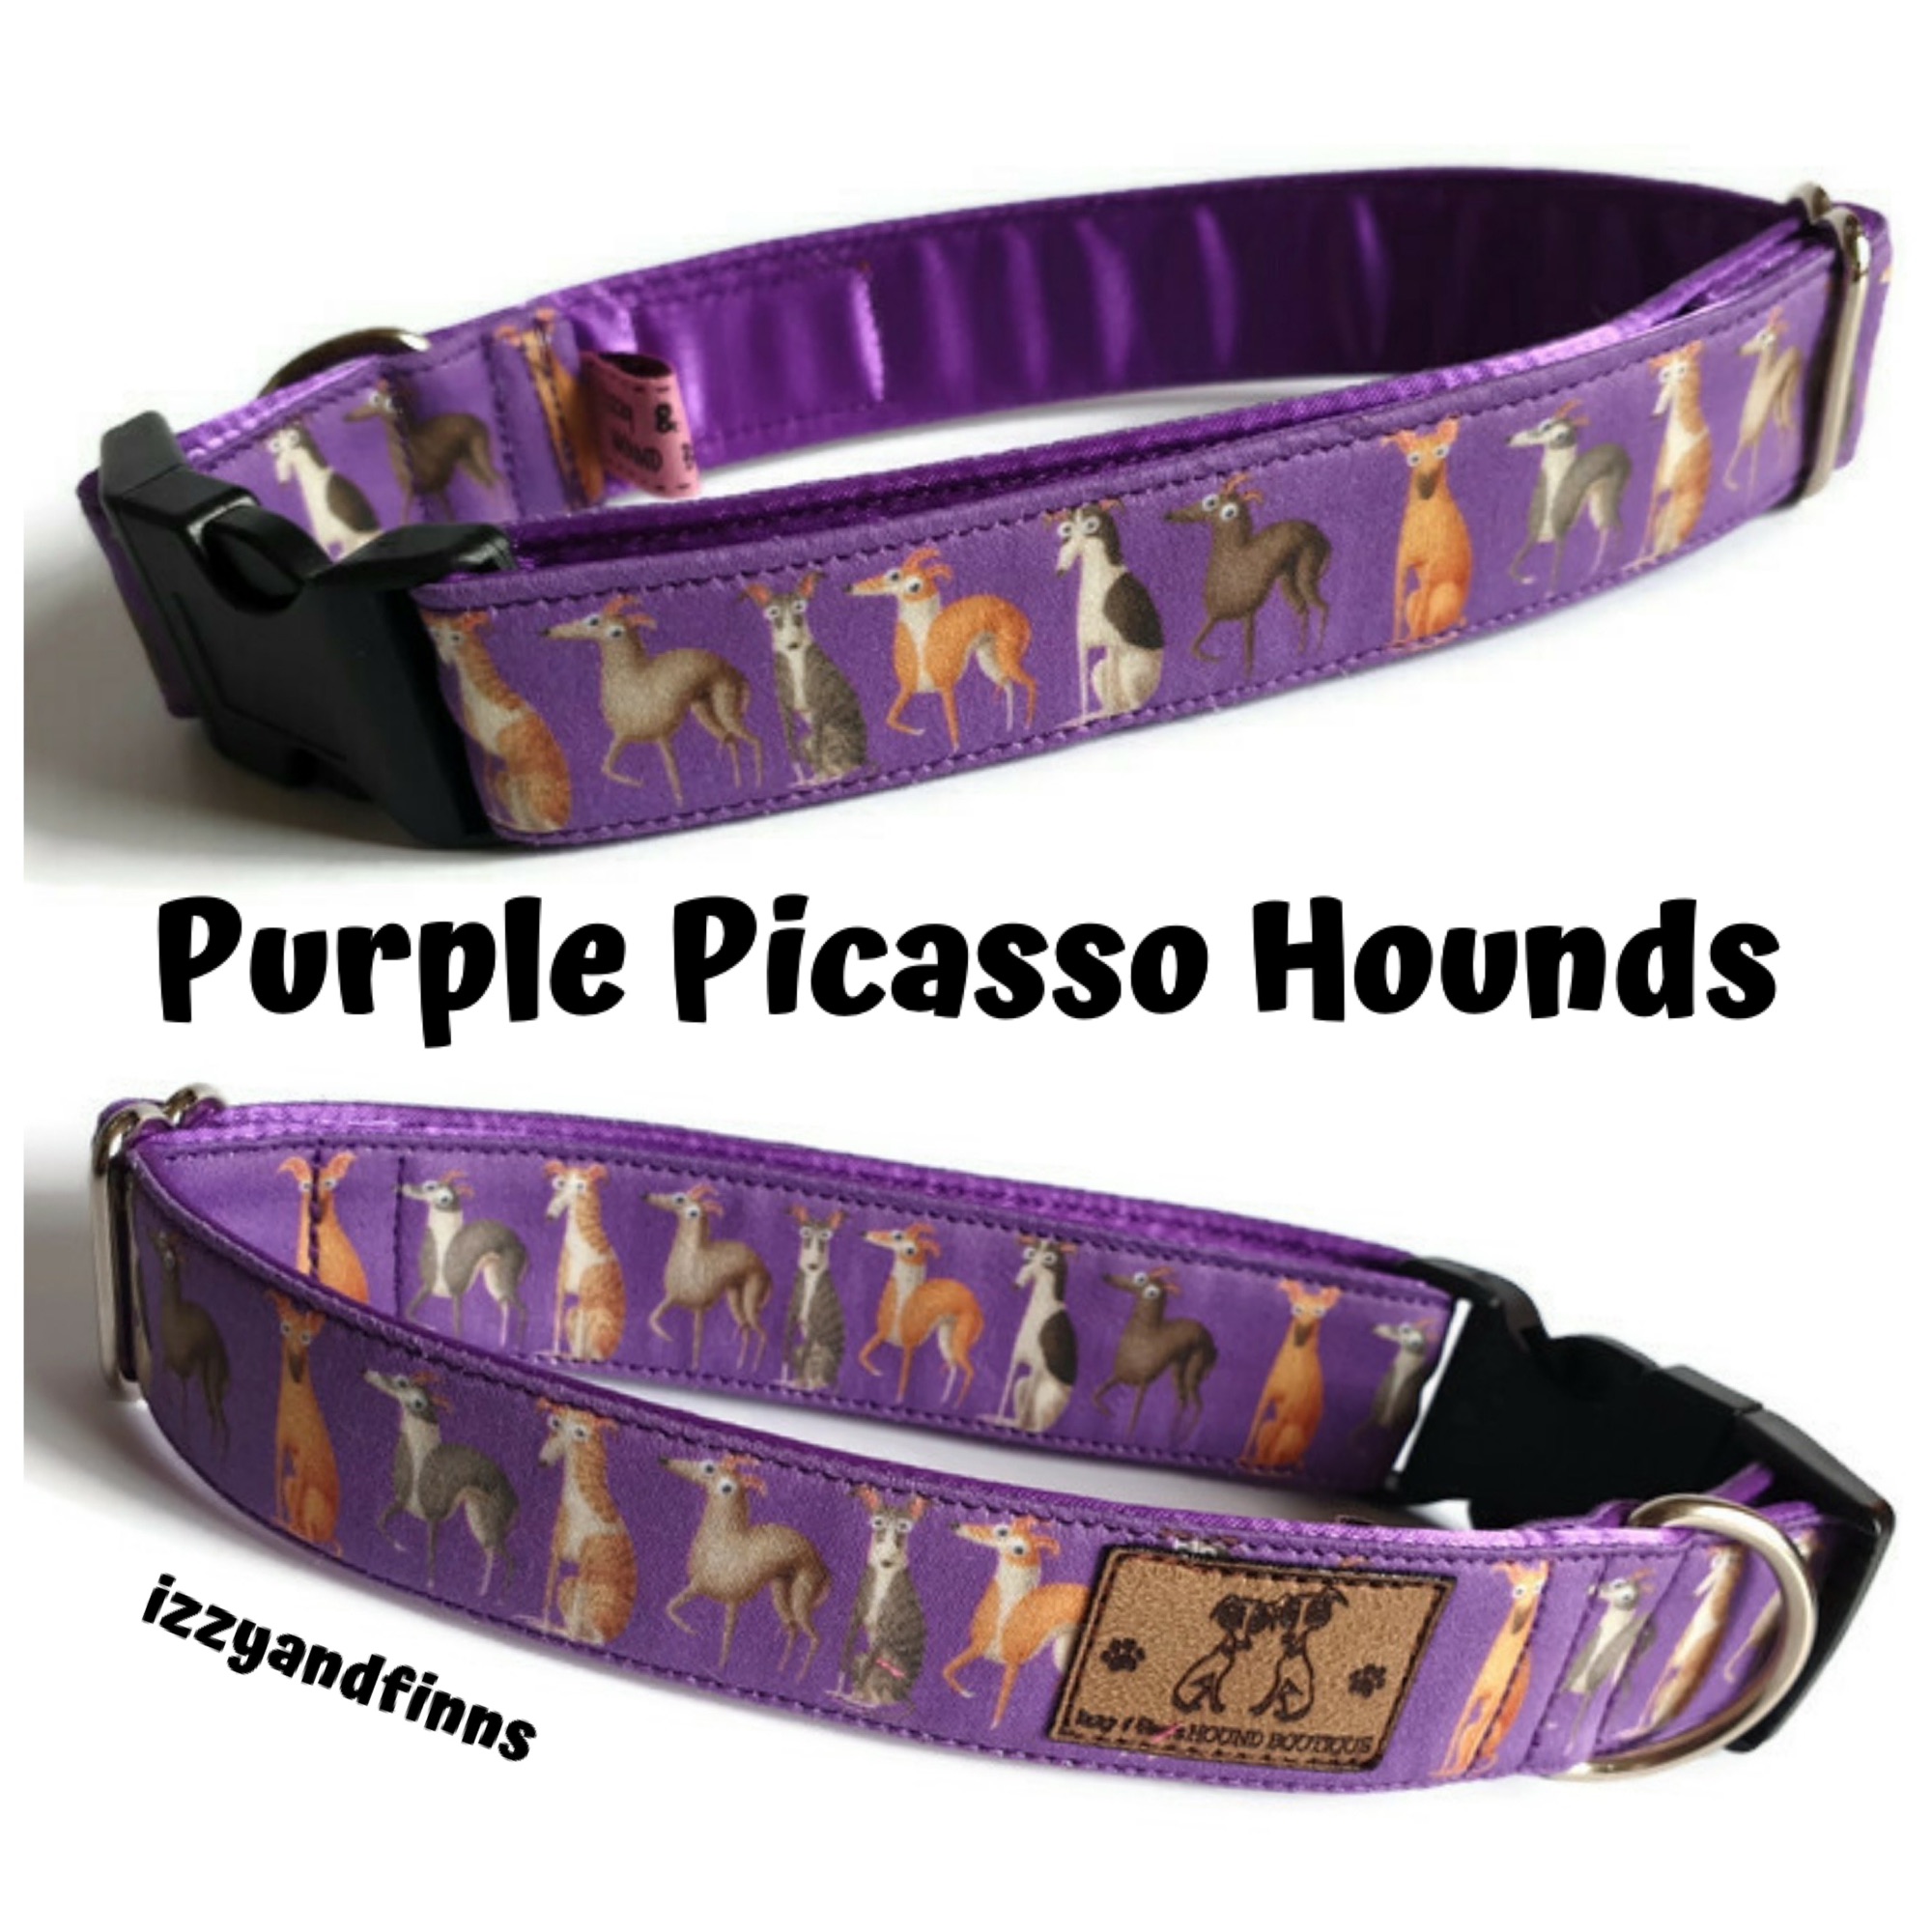 Purple Picasso Hounds